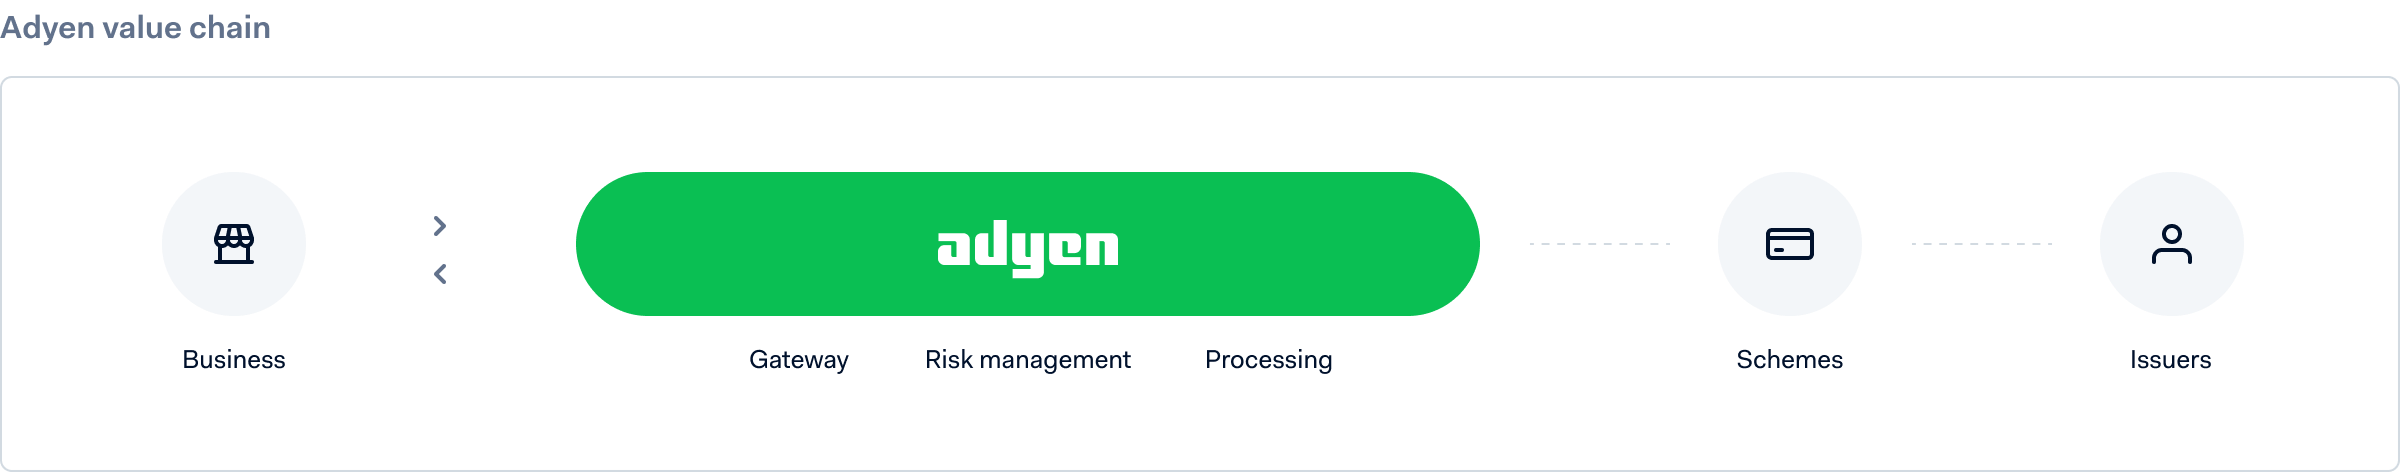 Where Adyen sits in the payment flow